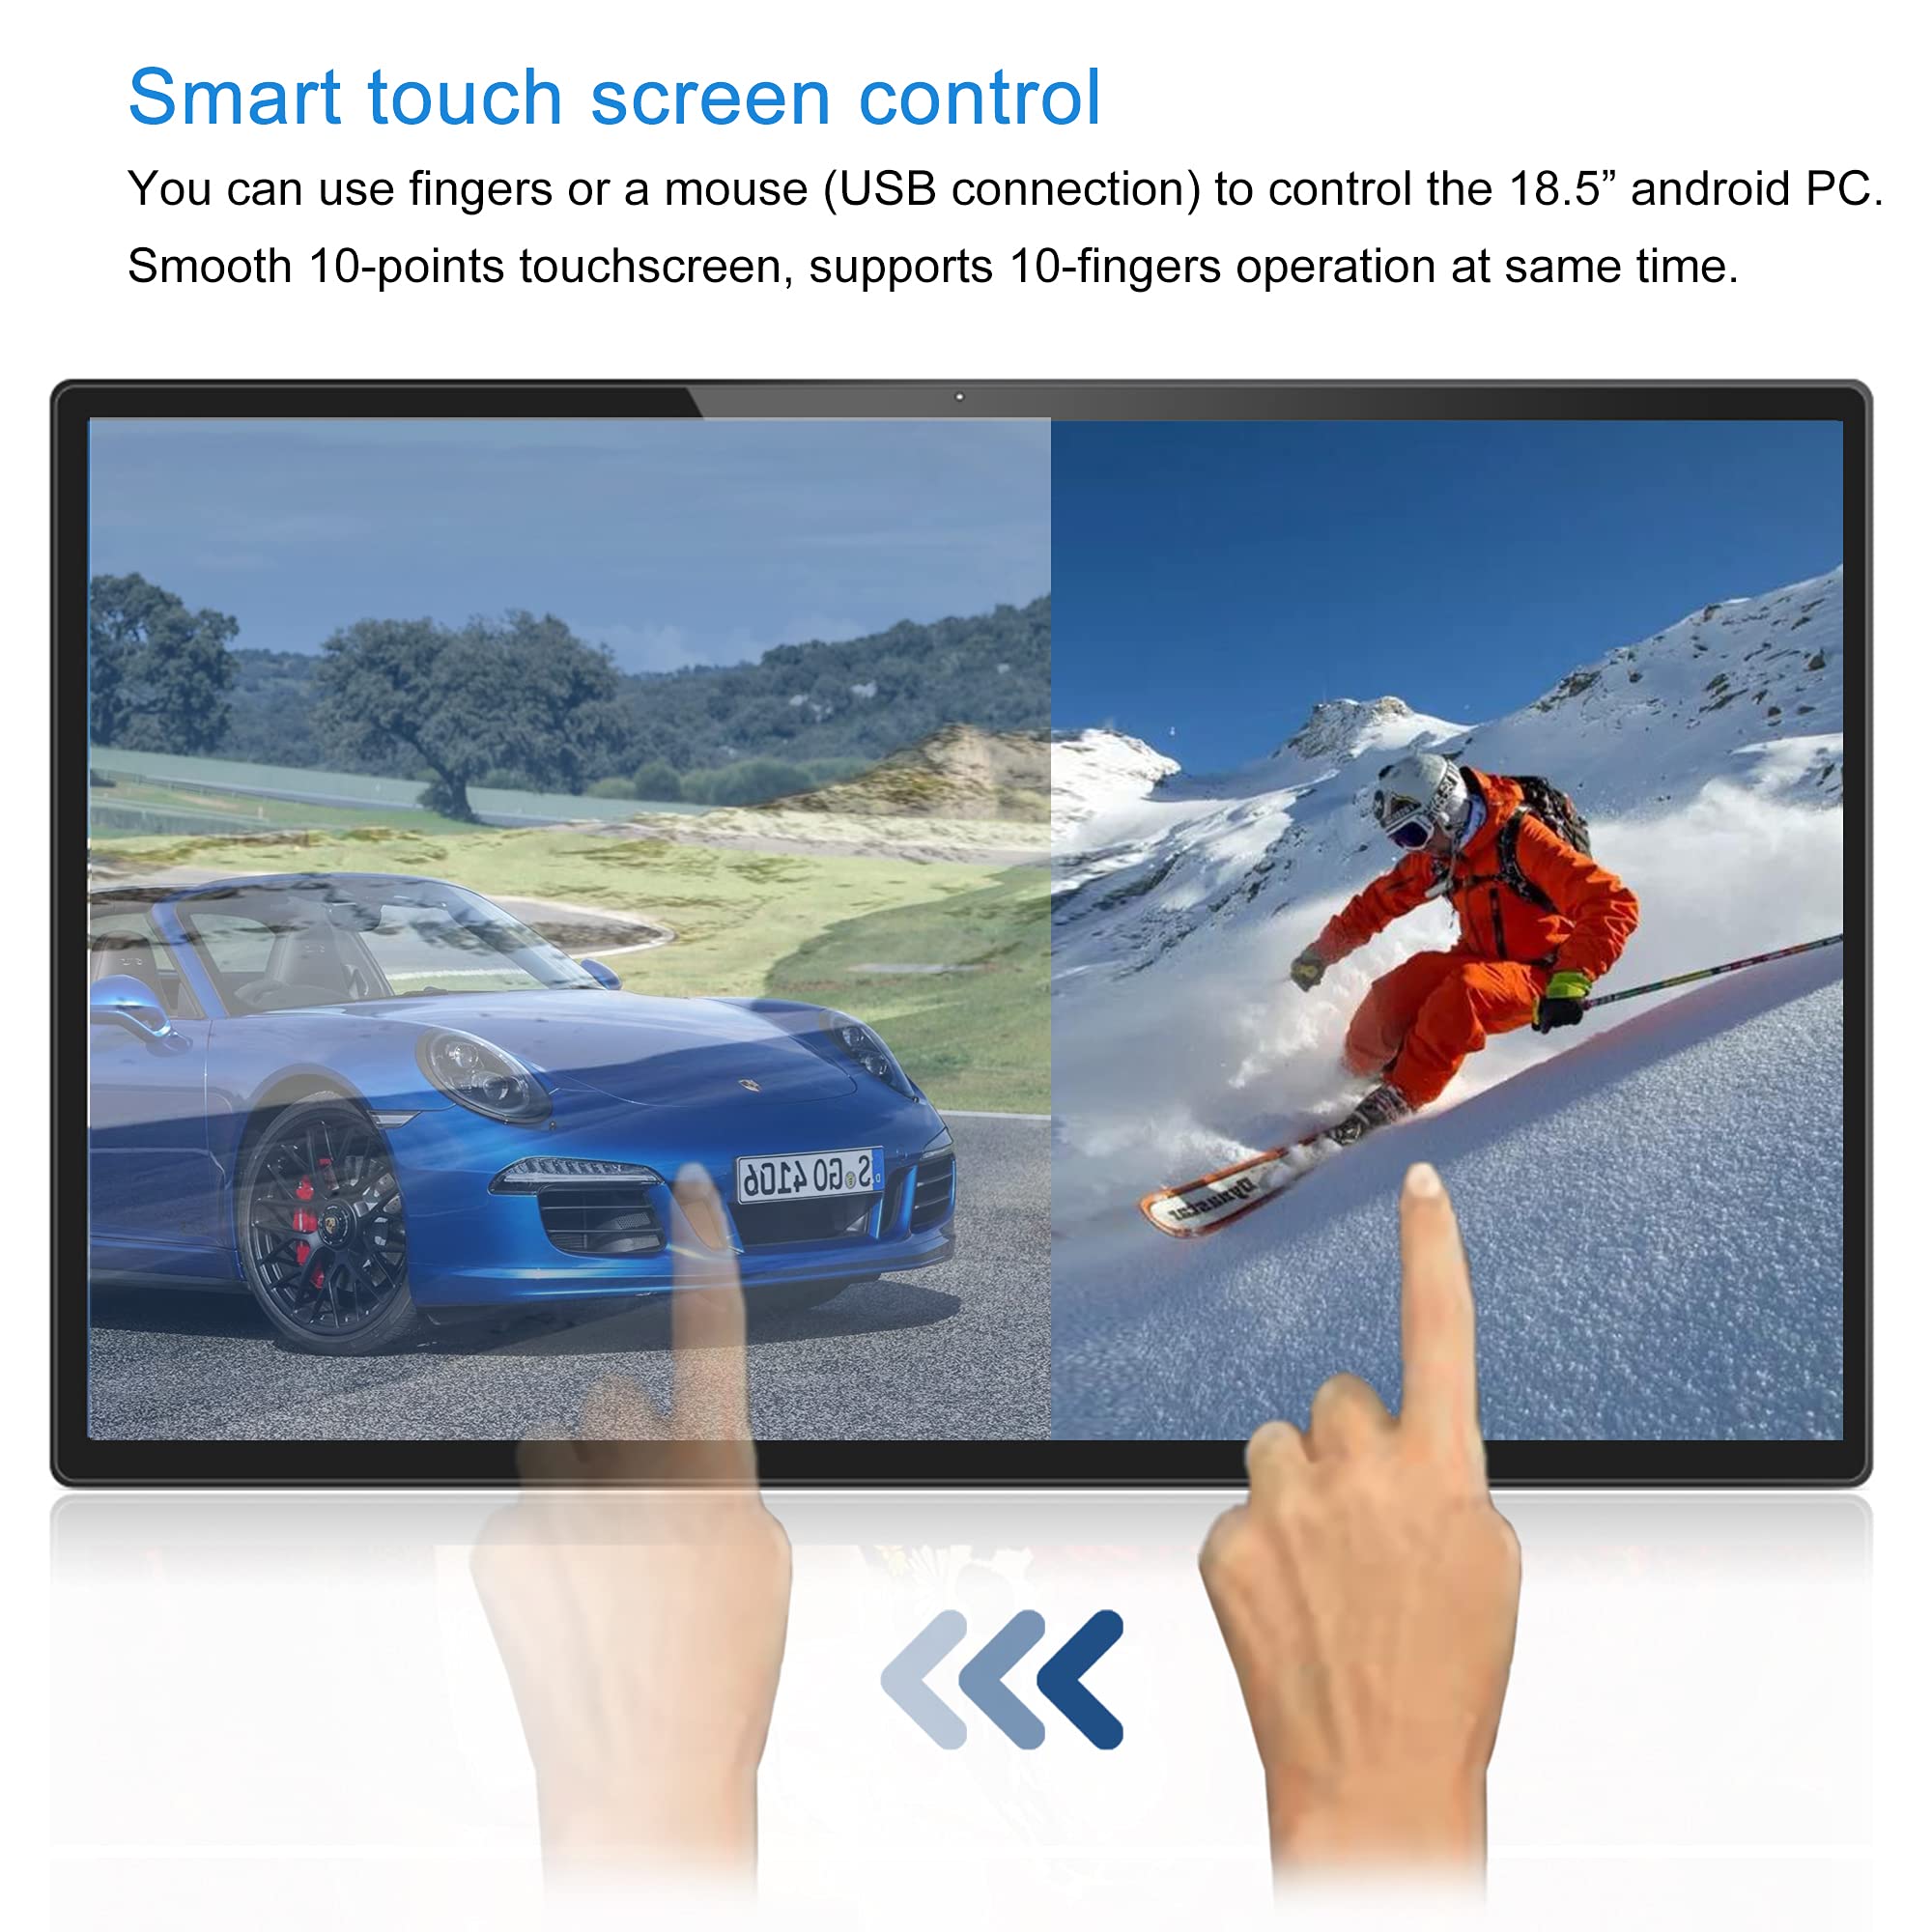 Wisepoch 18.5 inch Touch Screen Android All-in-one PC with 1366x768 HDMI WiFi Bluetooth LAN Camera for Learning Working Gaming Advertising (Six-core 4GB+32GB) (WEP-1850-IPC1)